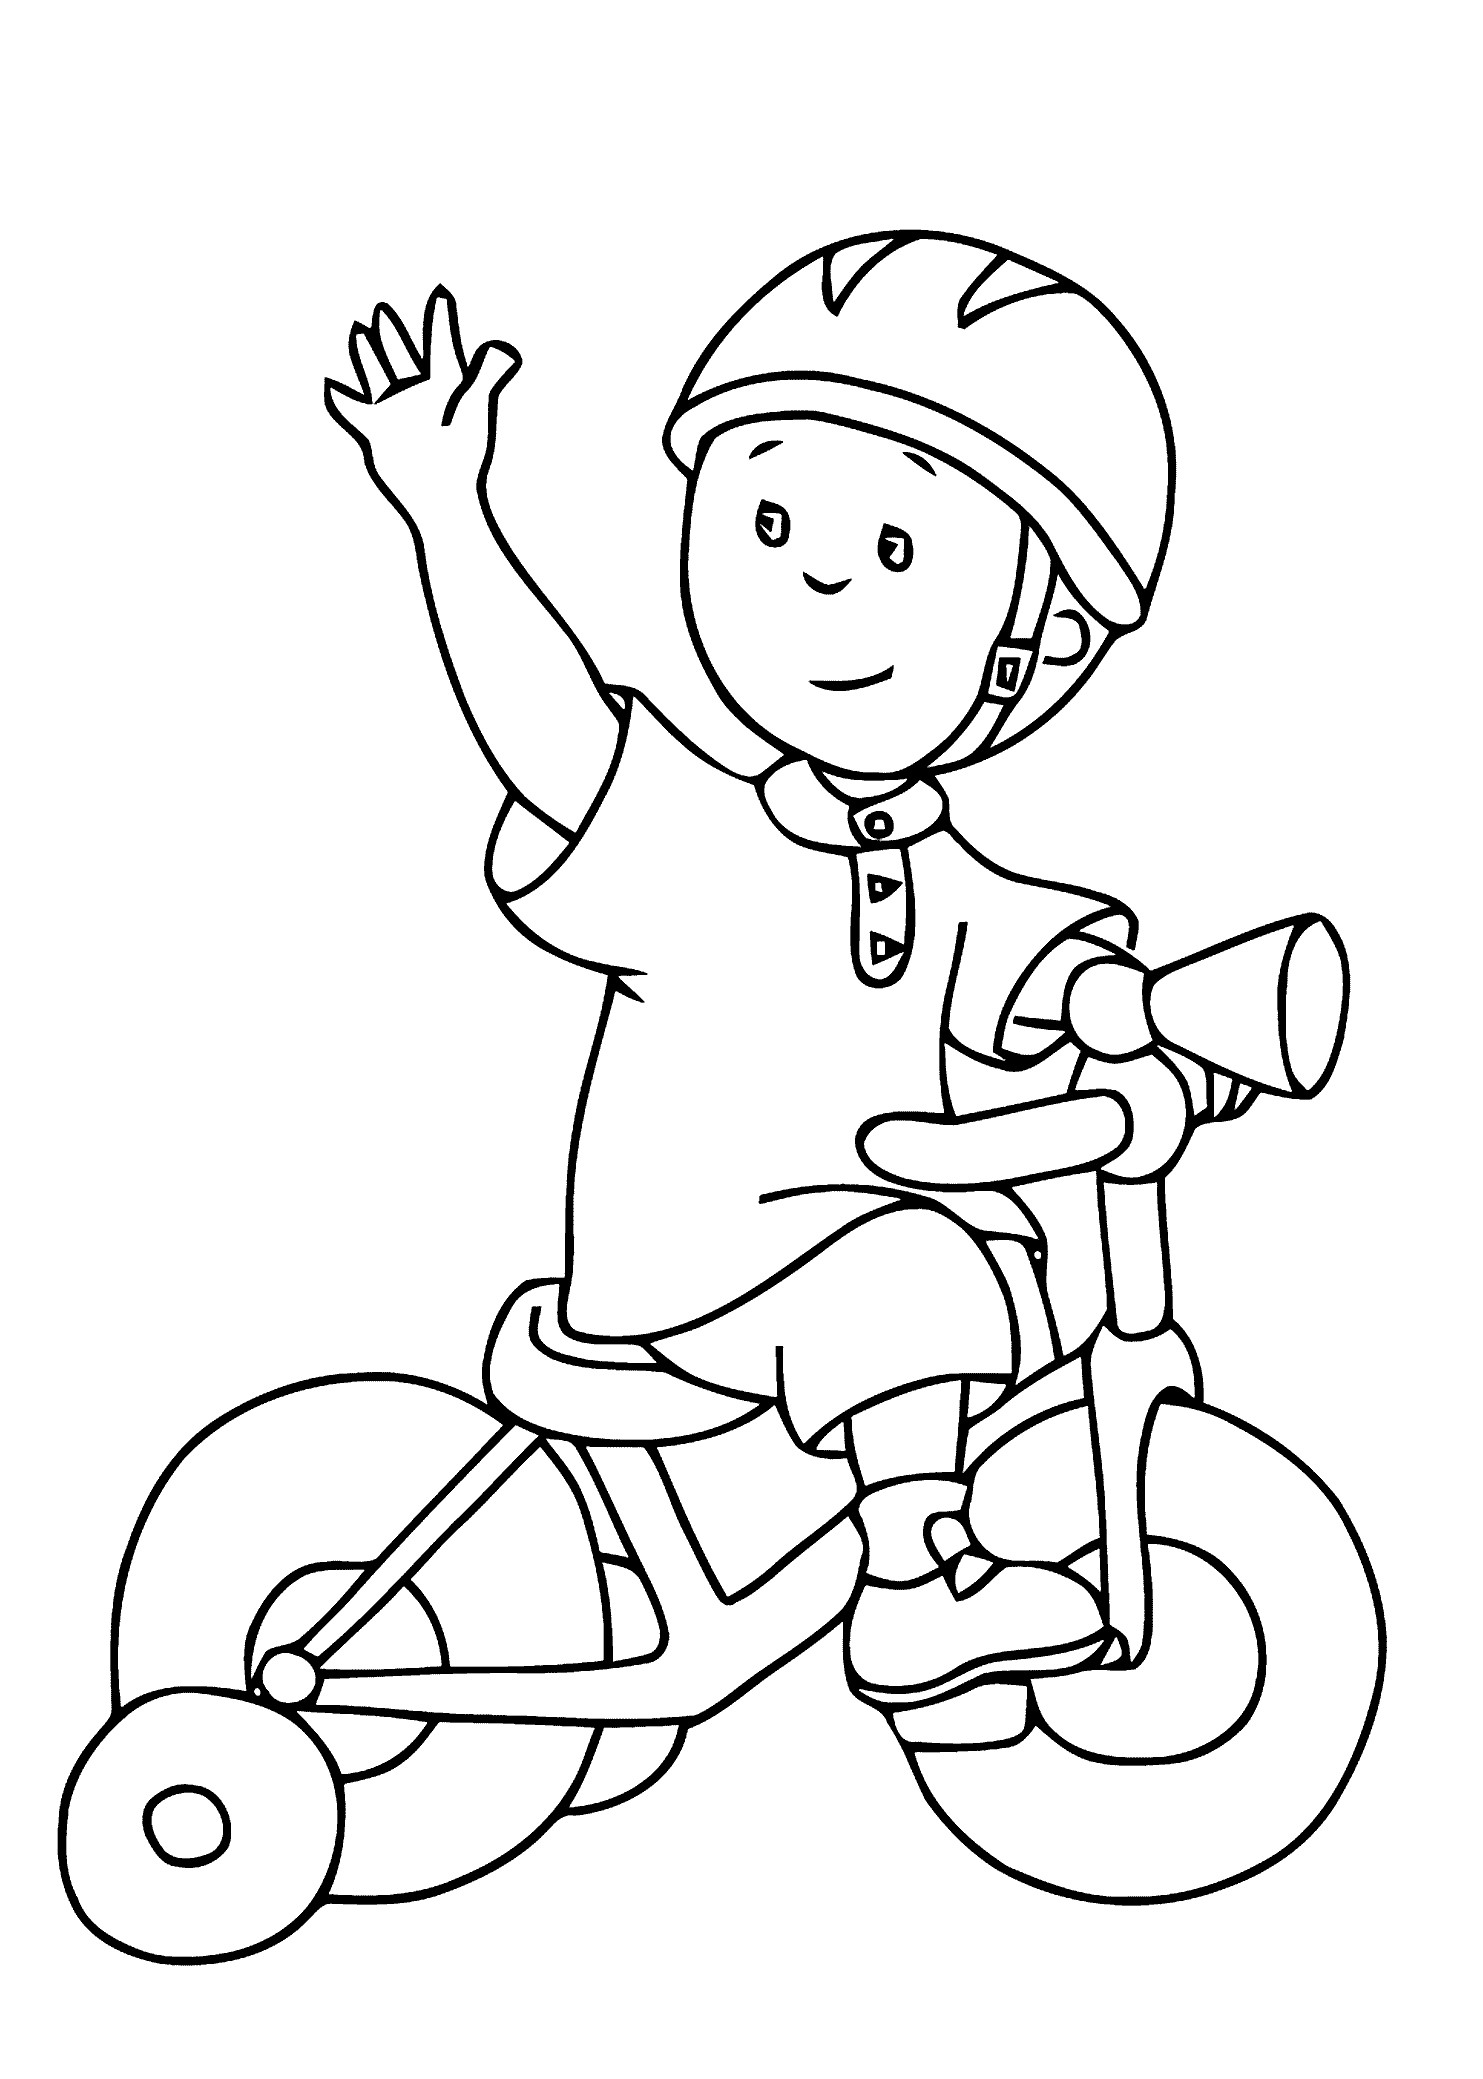 Caliou Coloring Sheets For Boys
 Caillou Coloring Pages coloringsuite